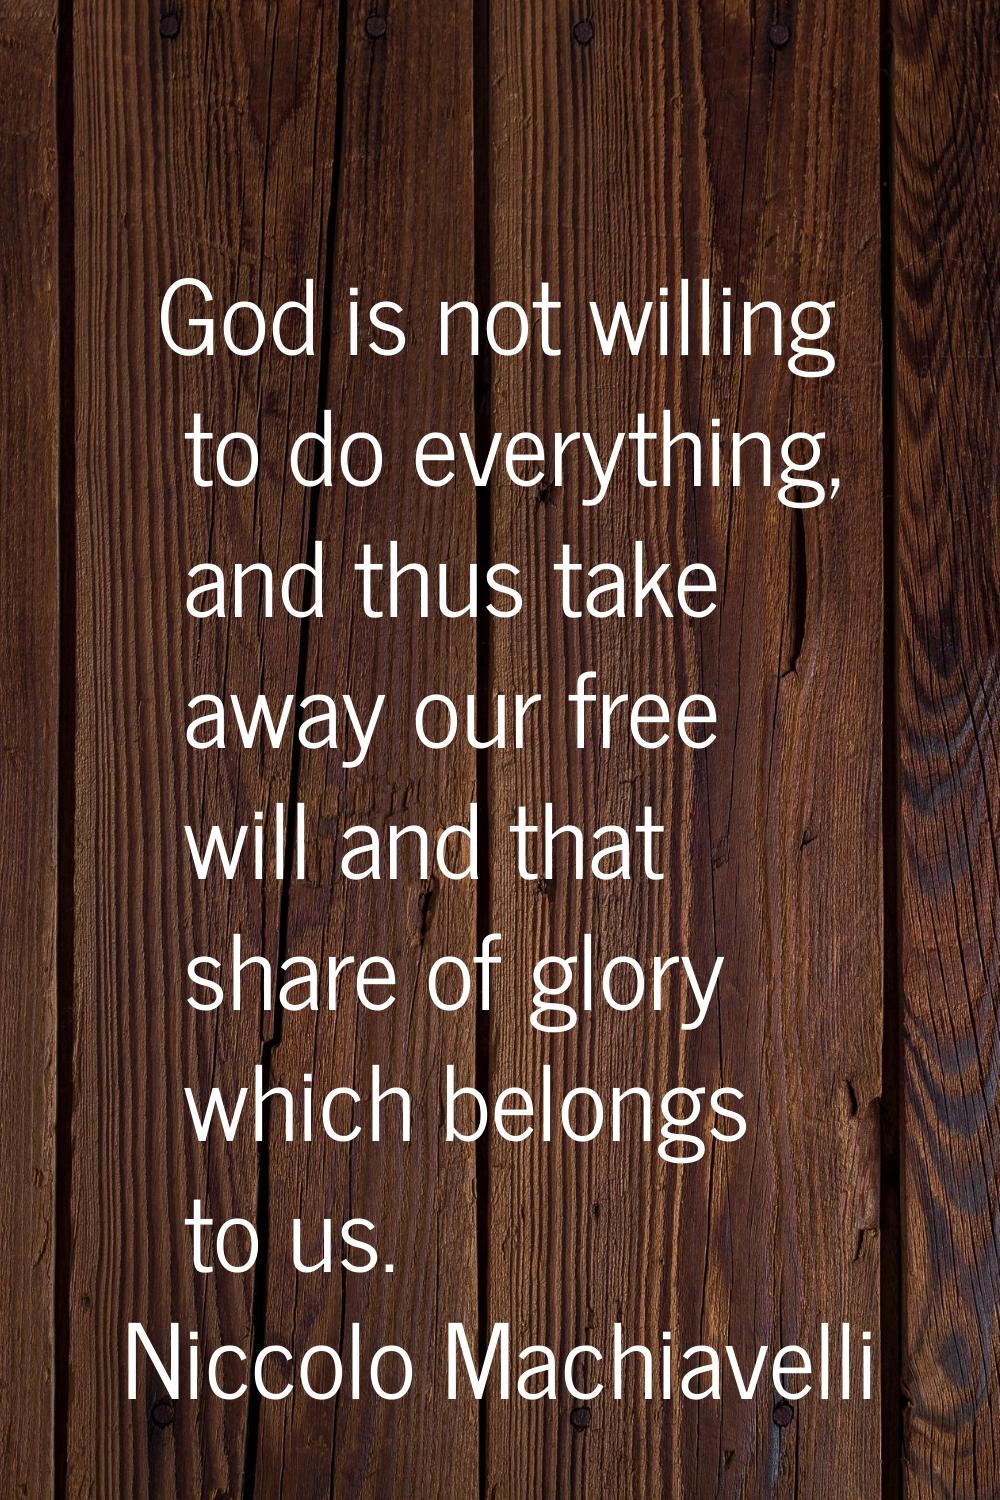 God is not willing to do everything, and thus take away our free will and that share of glory which